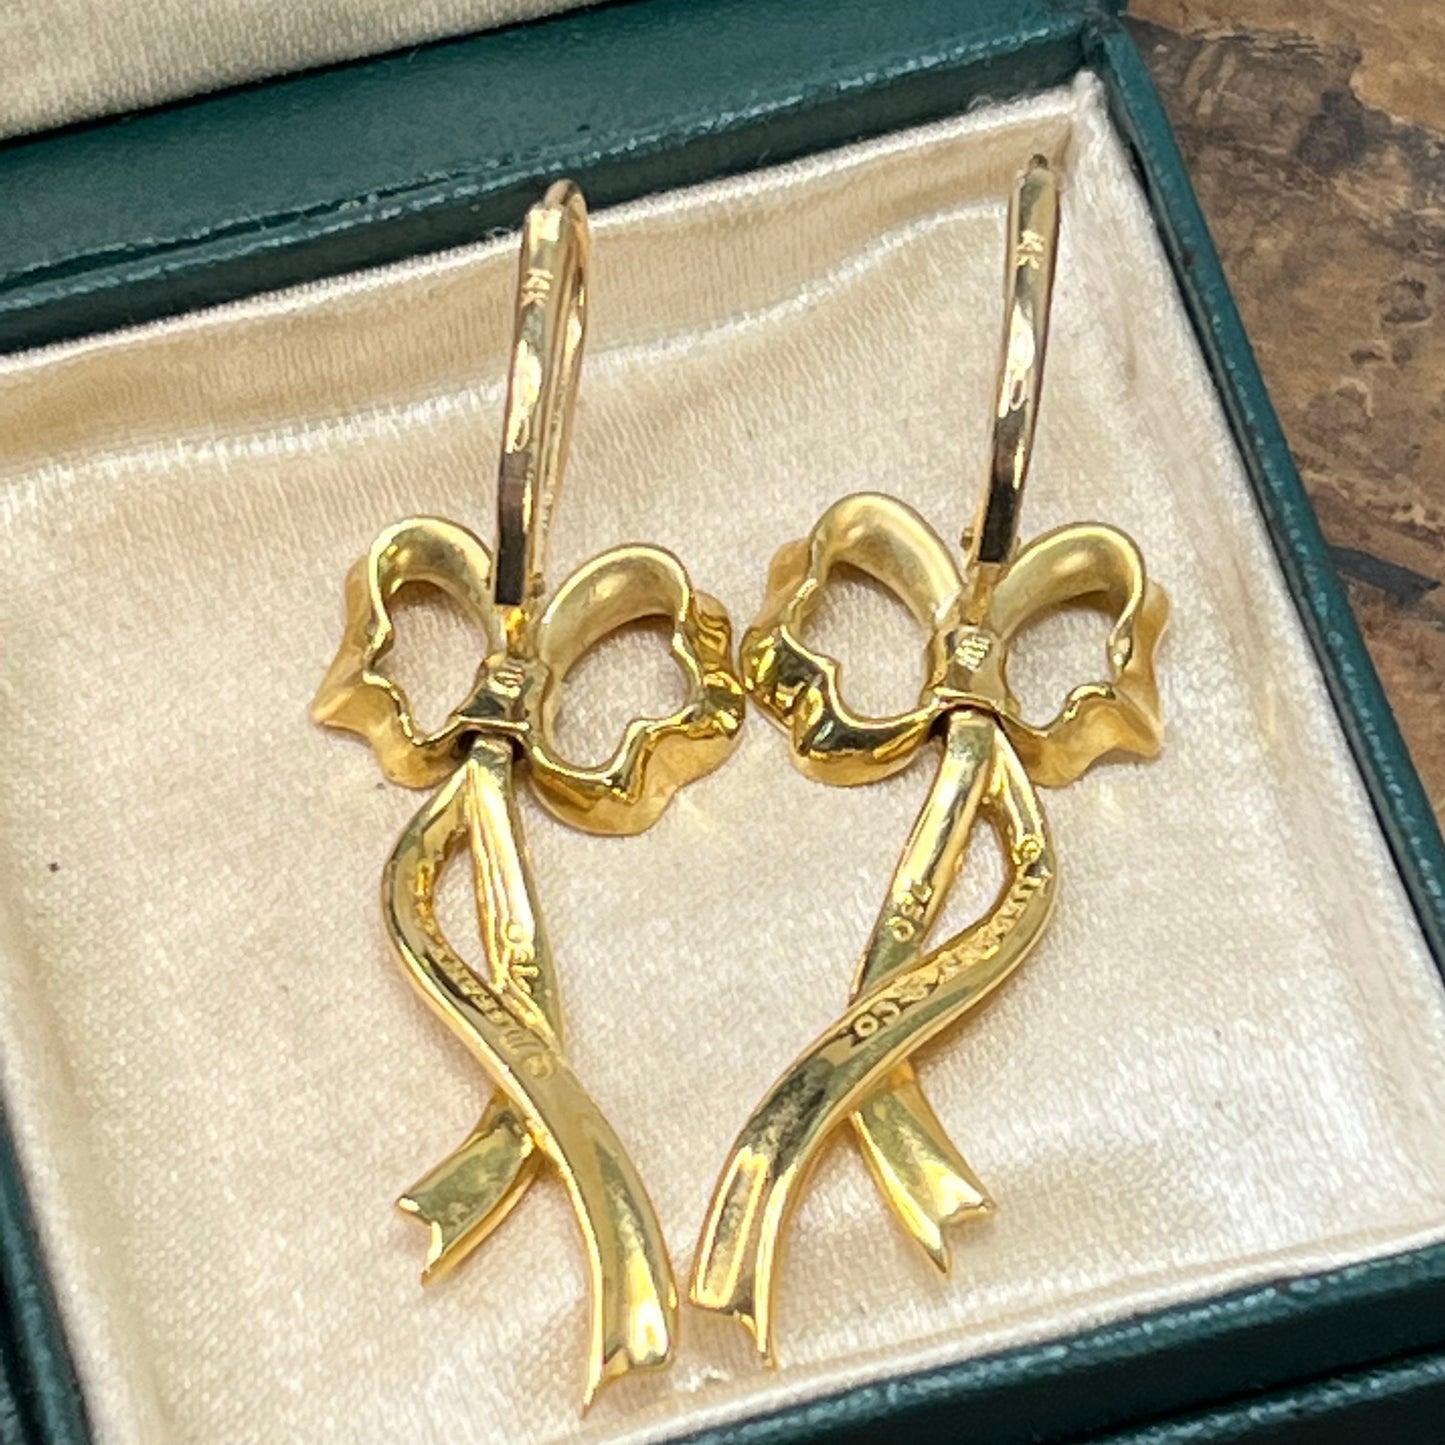 Tiffany & Co. 18K Yellow Gold Long Bow Articulated Earrings